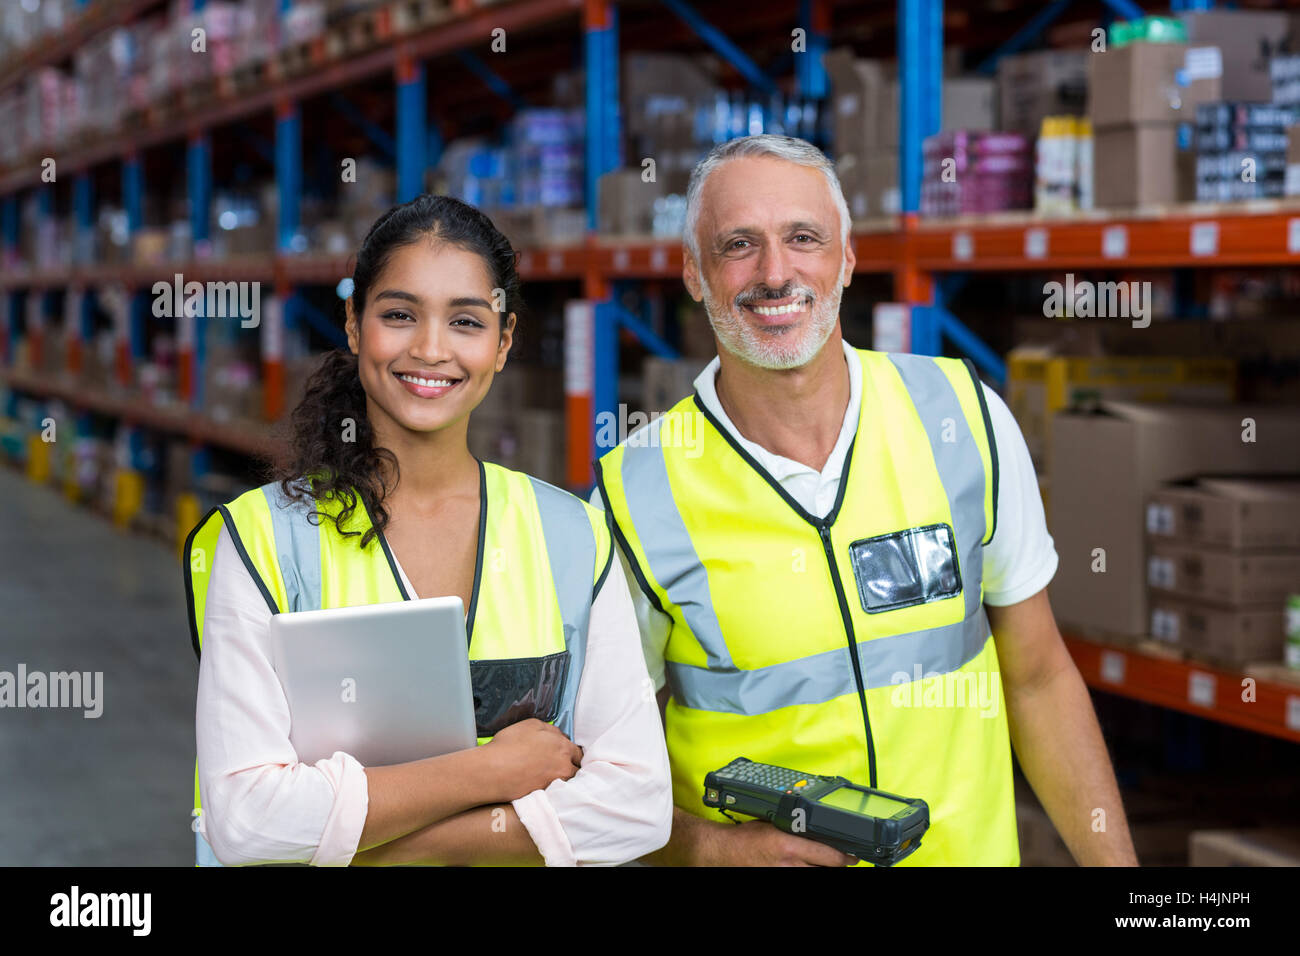 Portrait of warehouse workers standing with digital tablet and barcode scanner Stock Photo